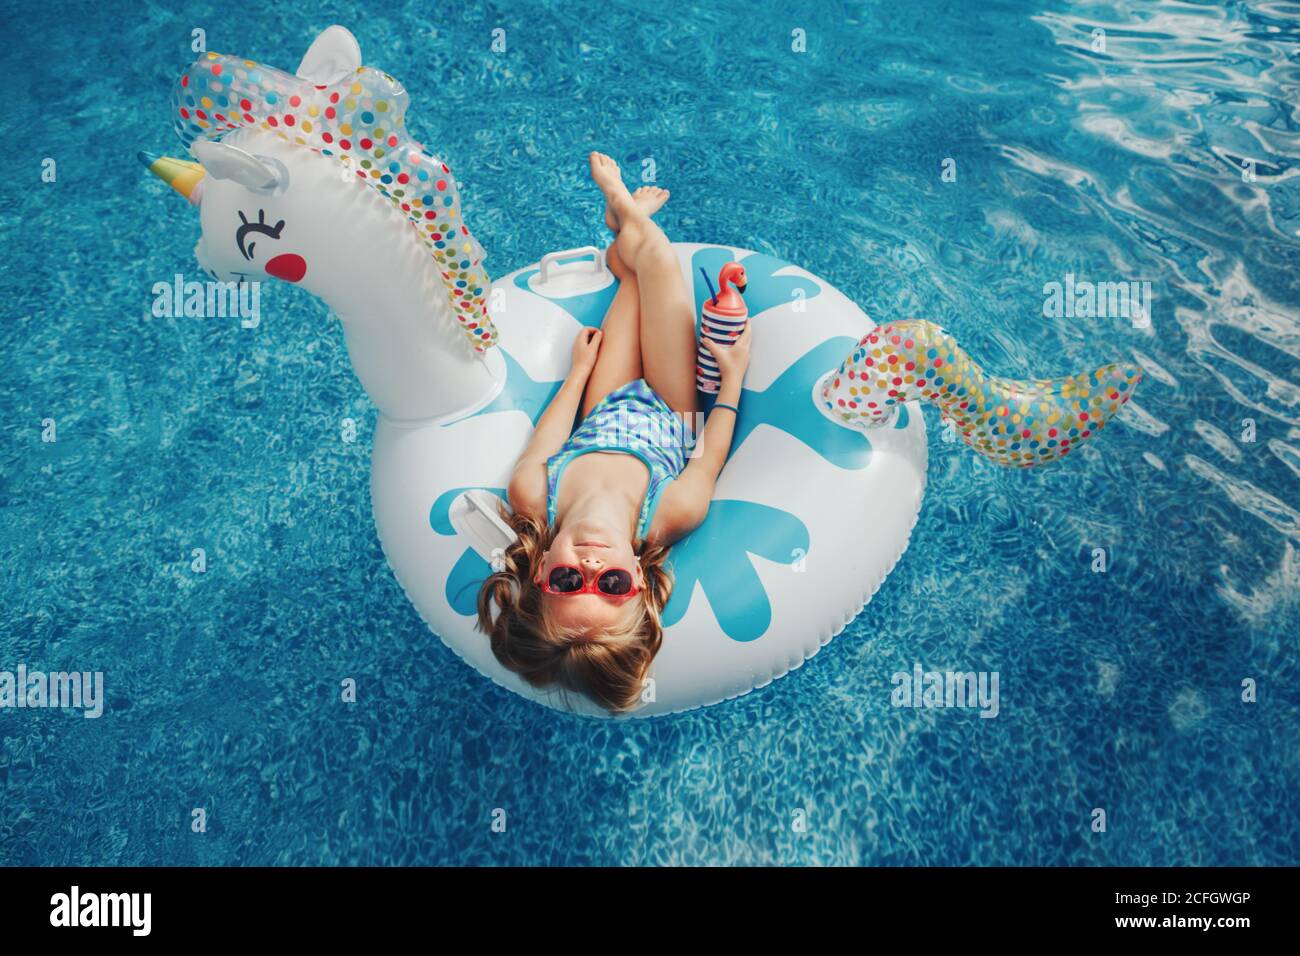 Cute adorable girl in sunglasses with drink lying on inflatable ring unicorn. Kid child enjoying having fun in swimming pool. Summer outdoor water act Stock Photo